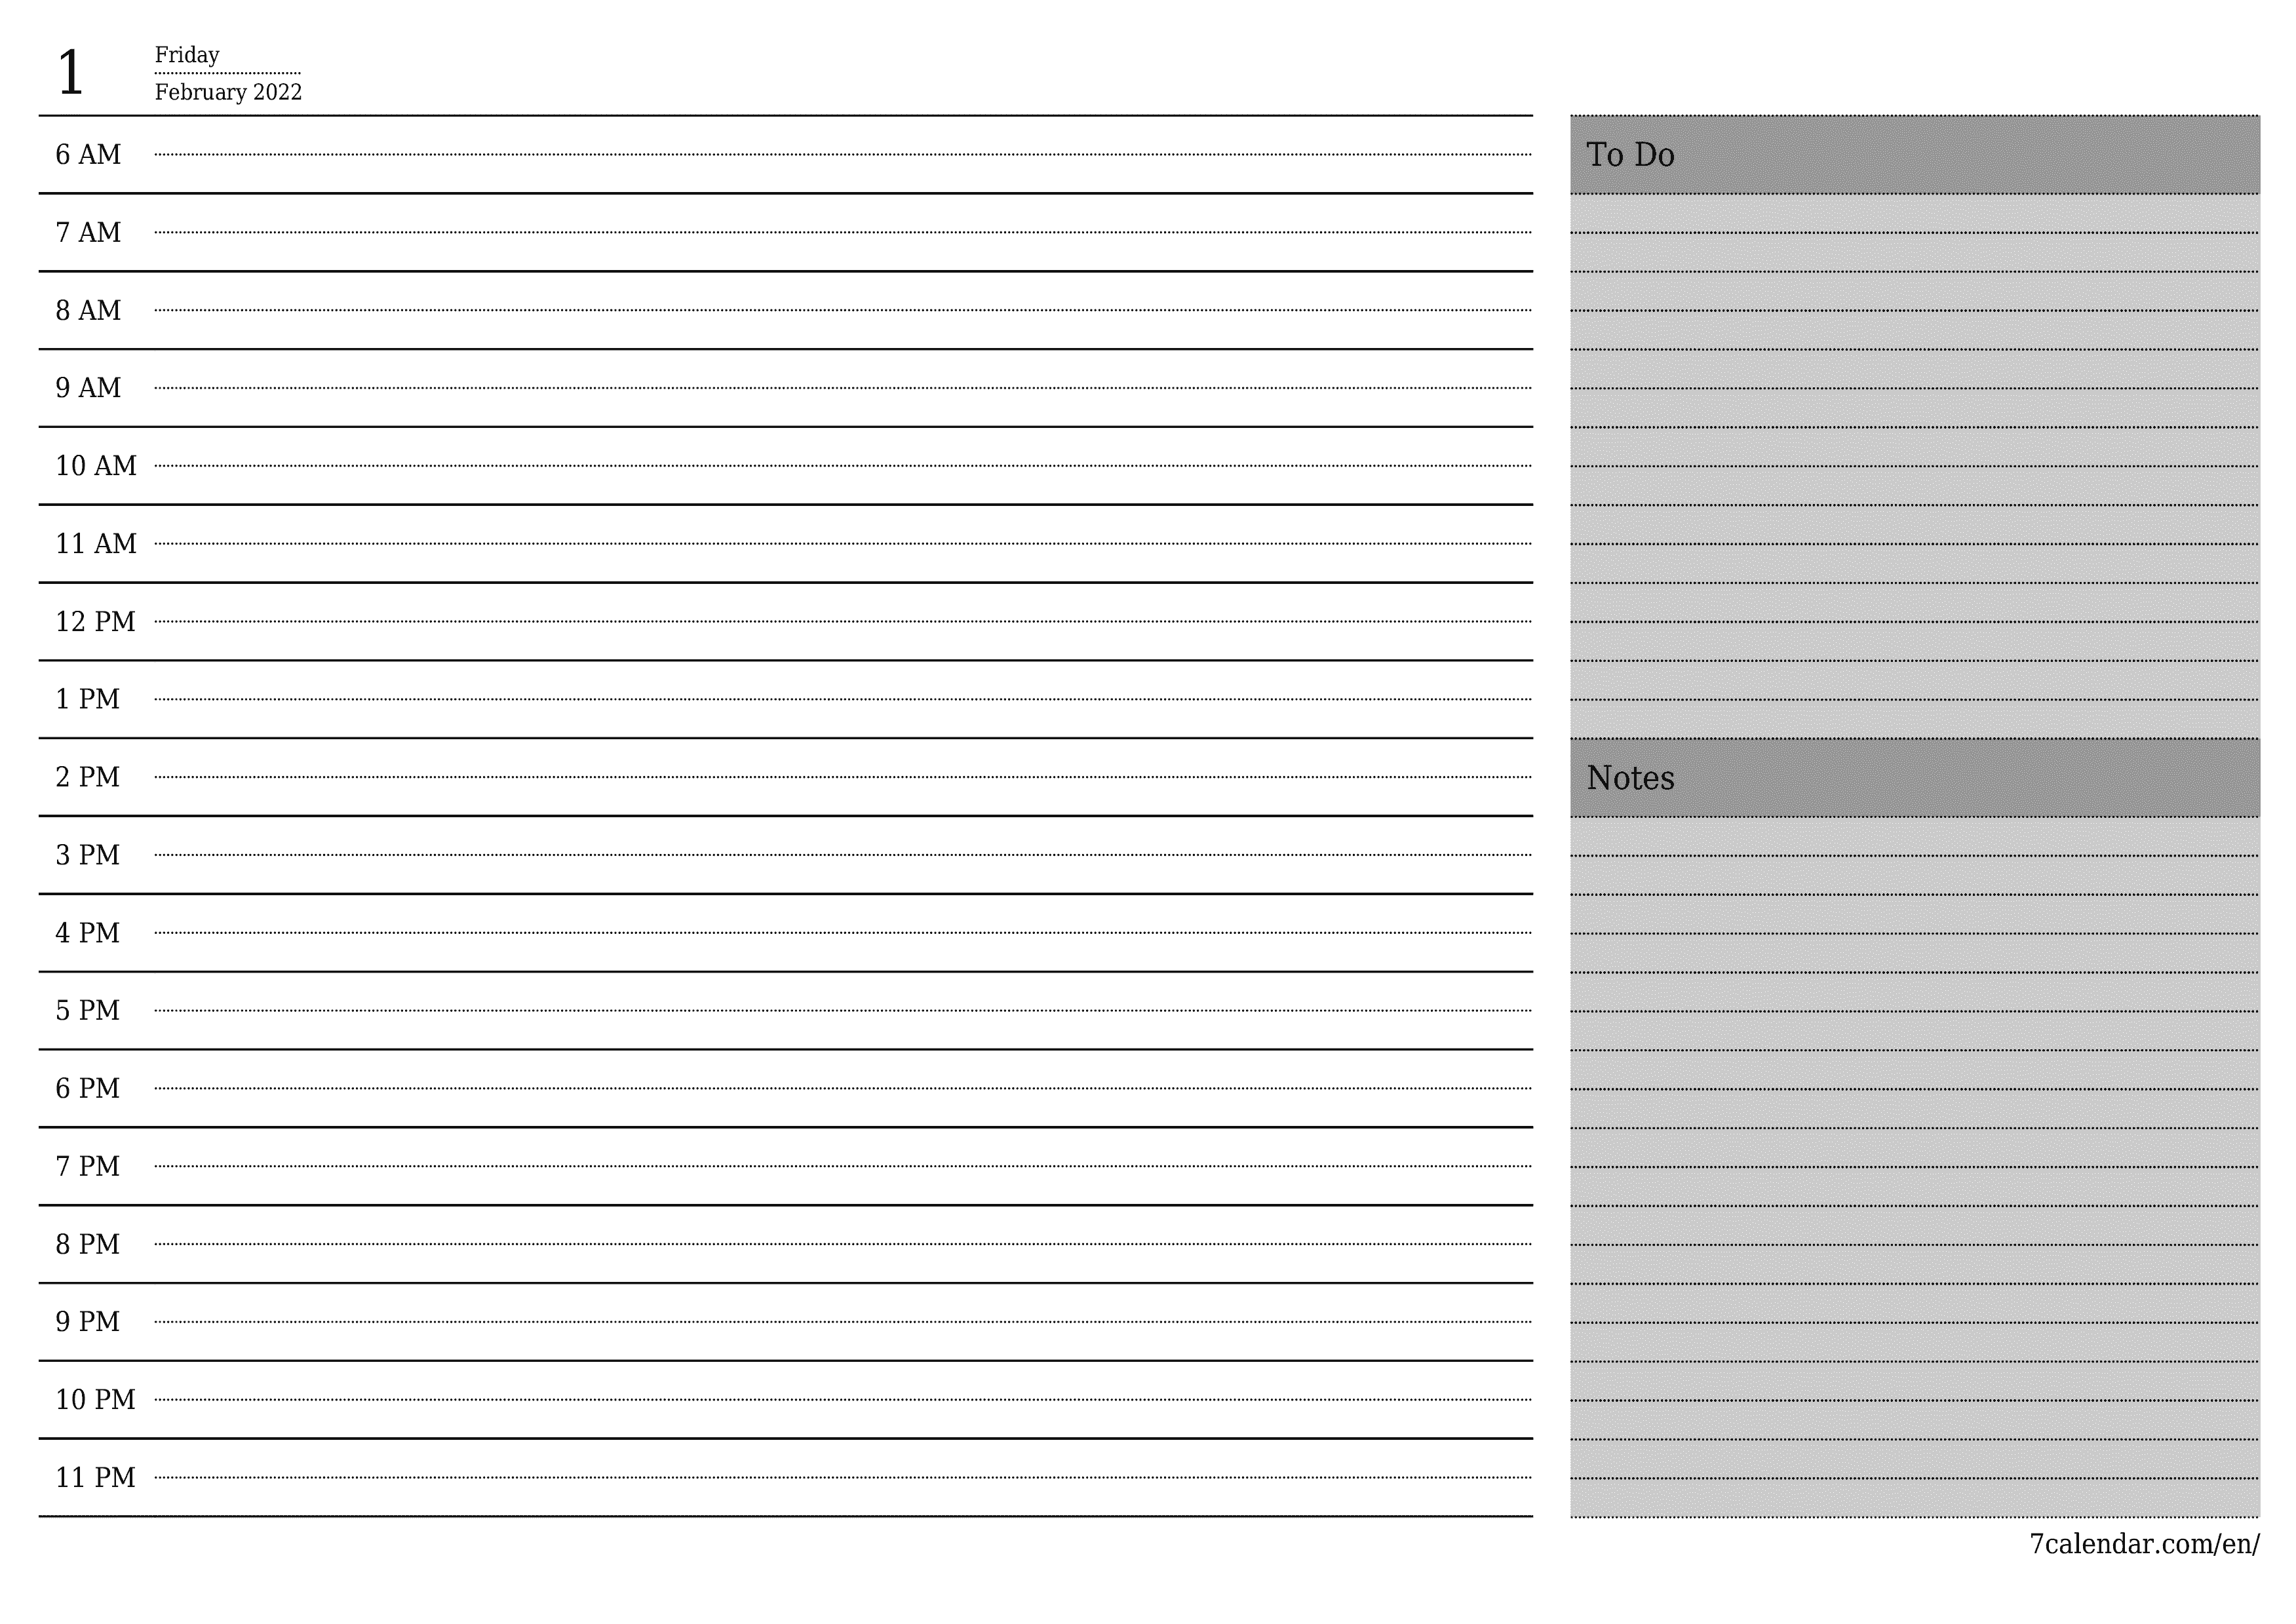 Blank daily printable calendar and planner for day February 2022 with notes, save and print to PDF PNG English - 7calendar.com